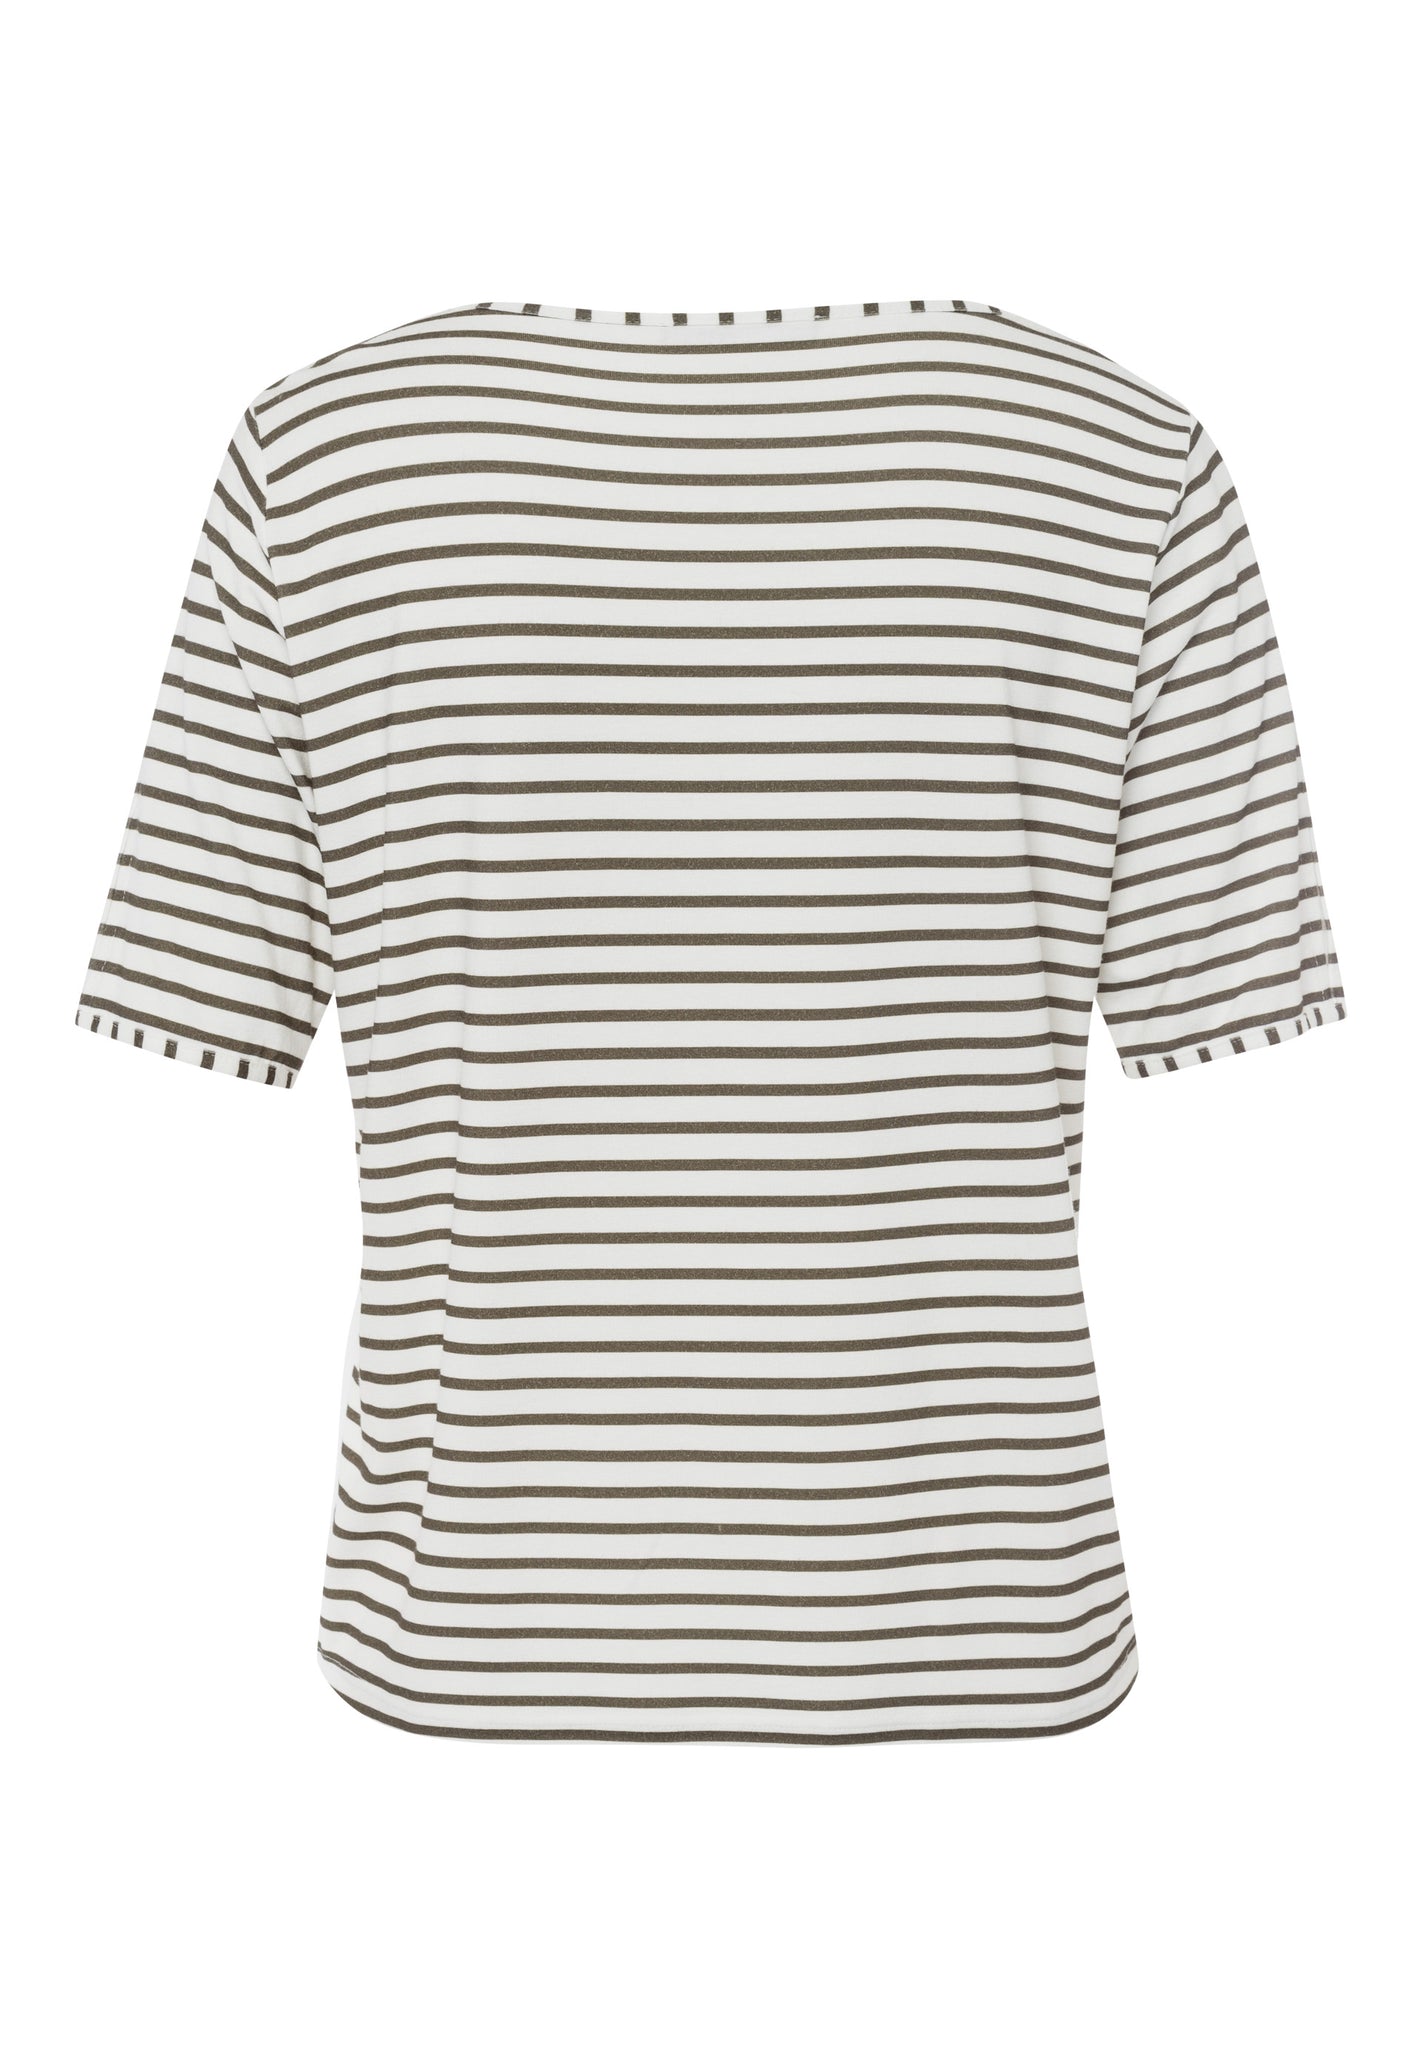 Frank walder Caribbean dream collection stripe print tshirt in khaki and white

Product code 203.405